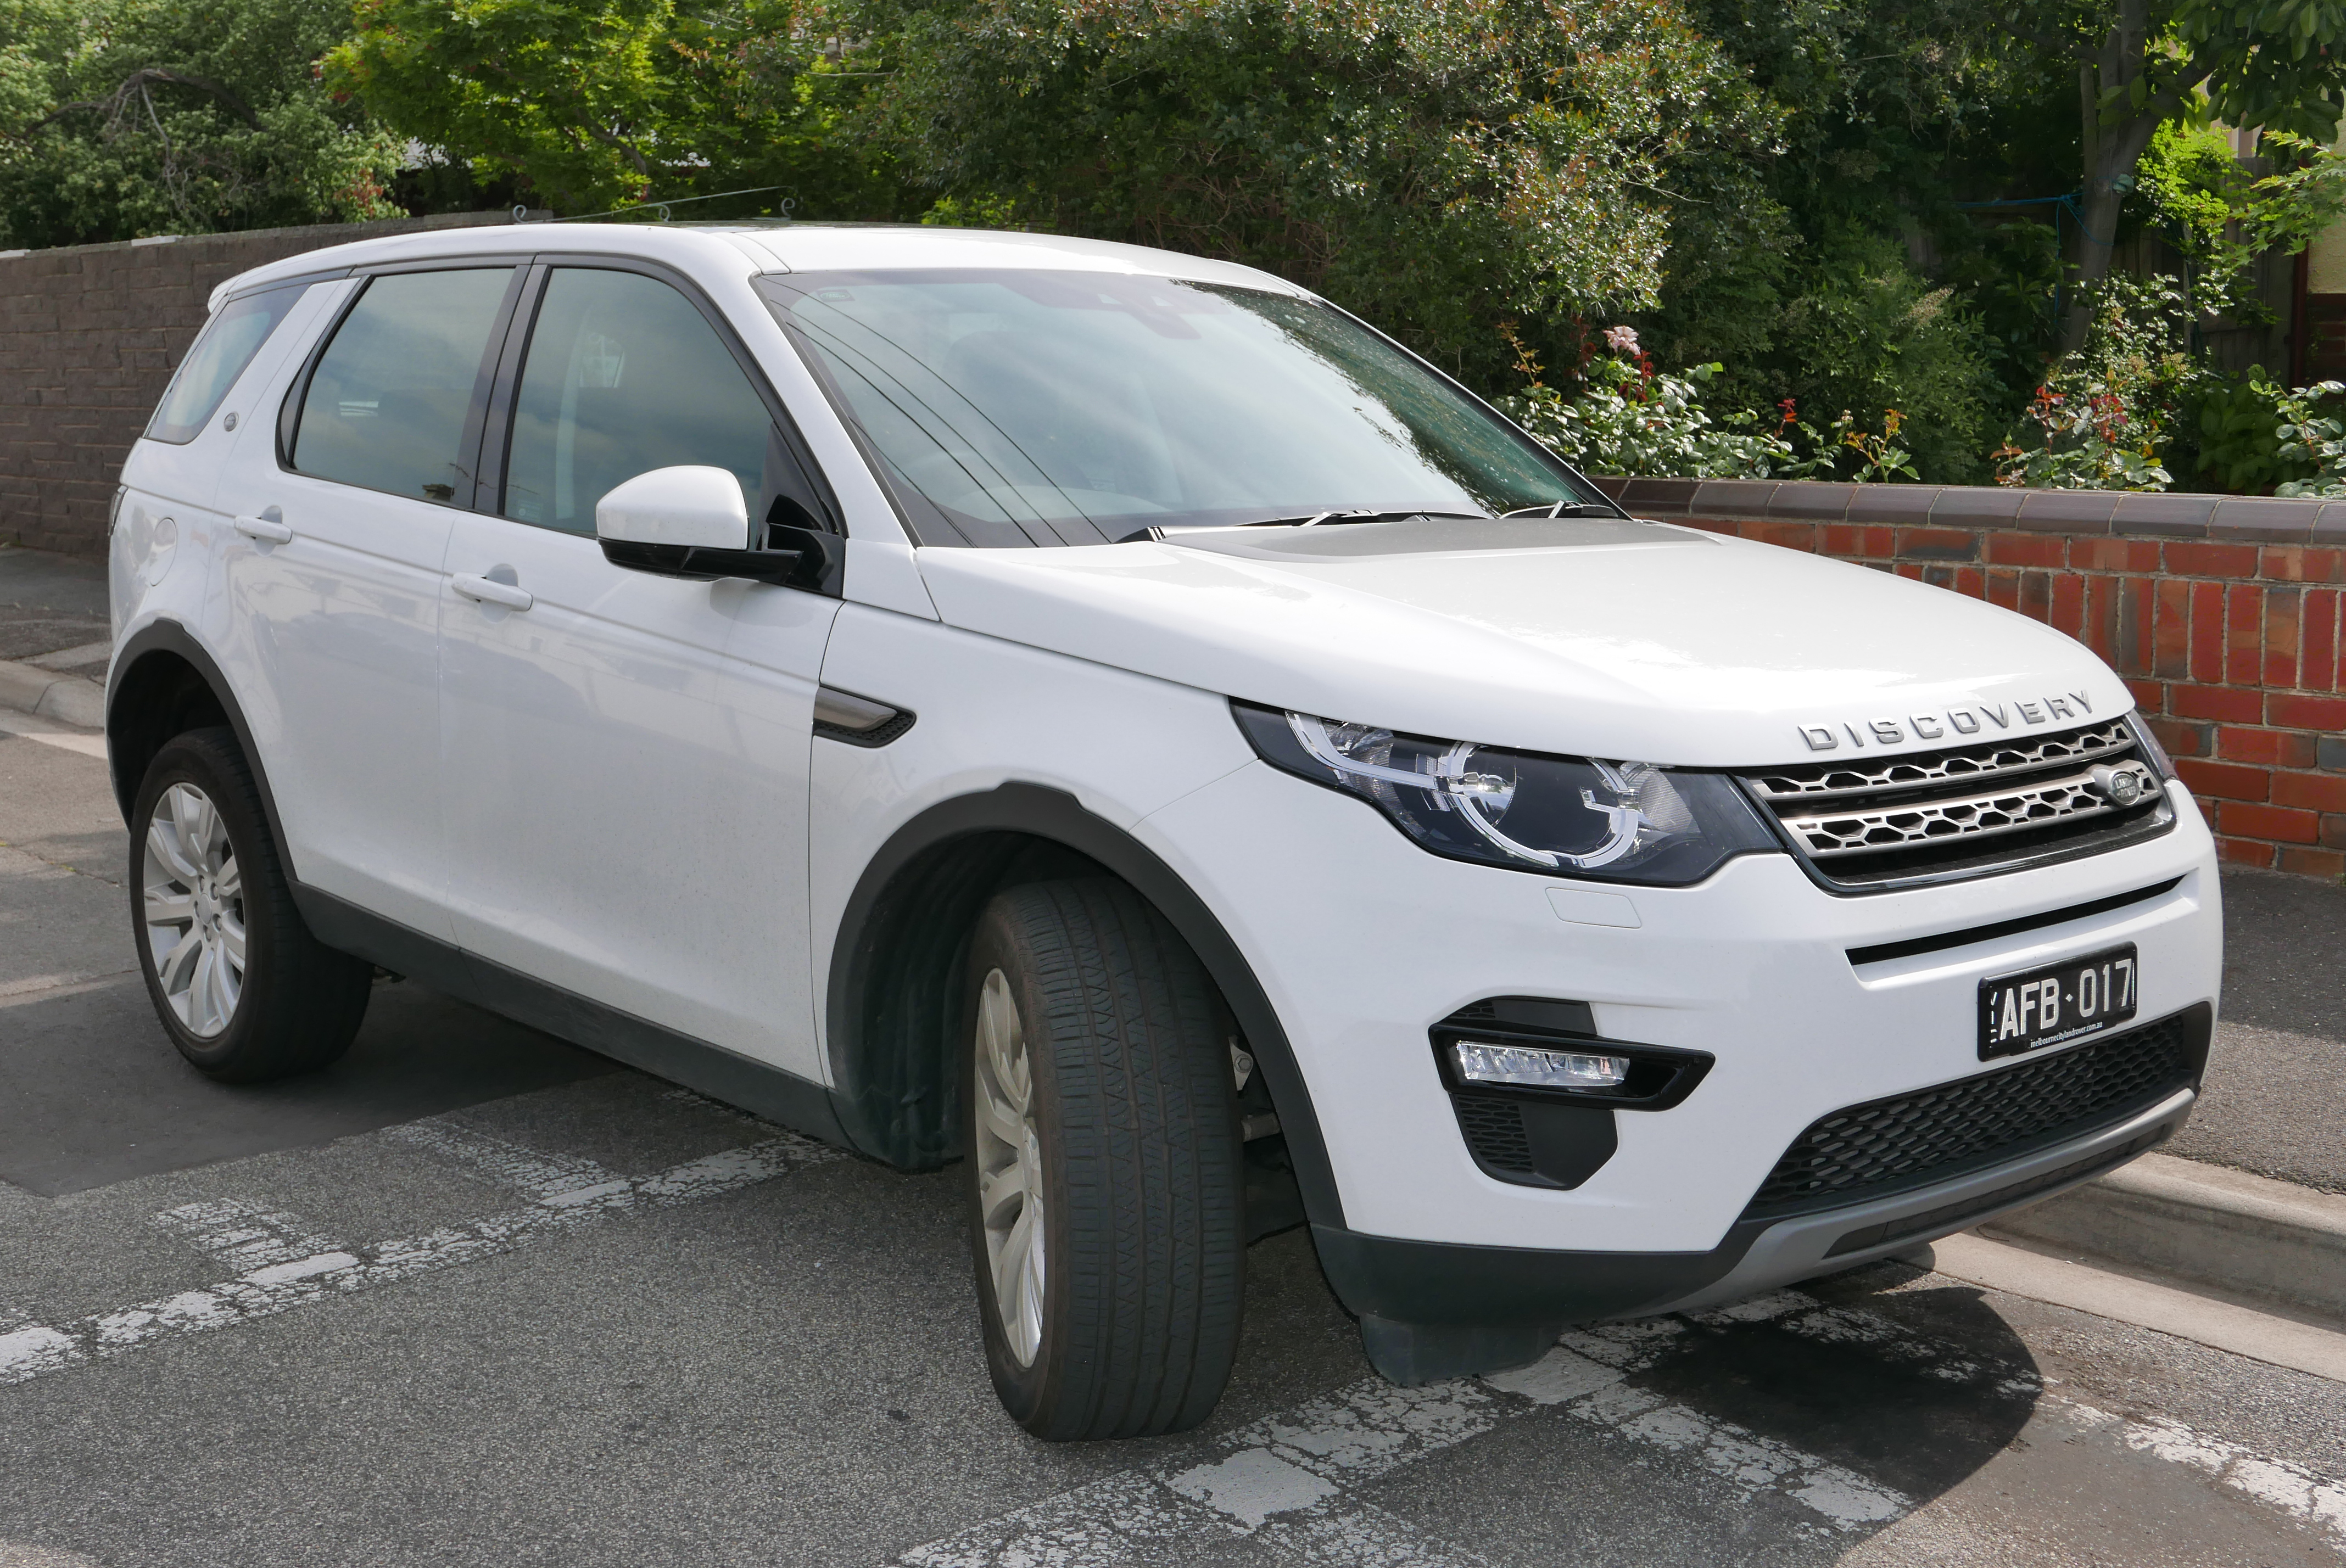 https://upload.wikimedia.org/wikipedia/commons/d/d5/2015_Land_Rover_Discovery_Sport_%28L550_MY15%29_SD4_SE_wagon_%282015-11-11%29_02.jpg